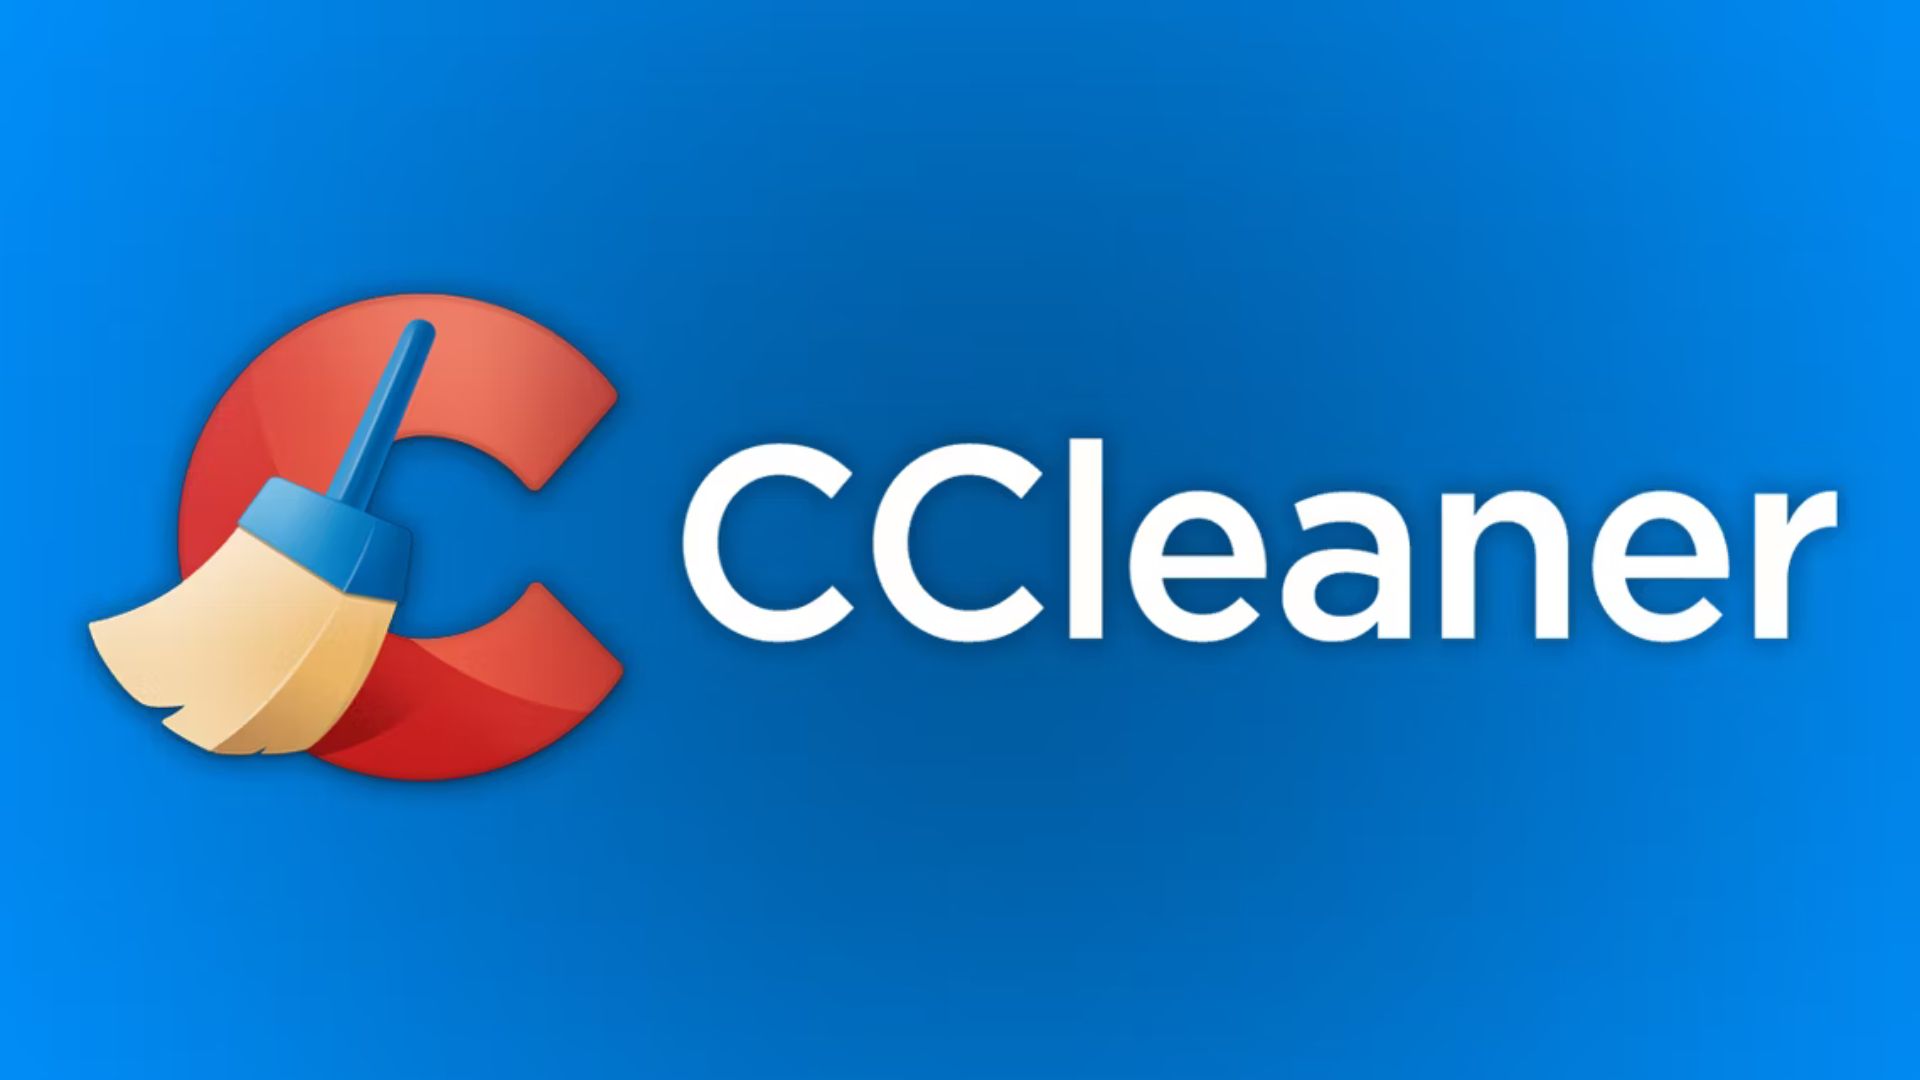 CCleaner Got Hacked, Exposing Emails, Addresses, and More